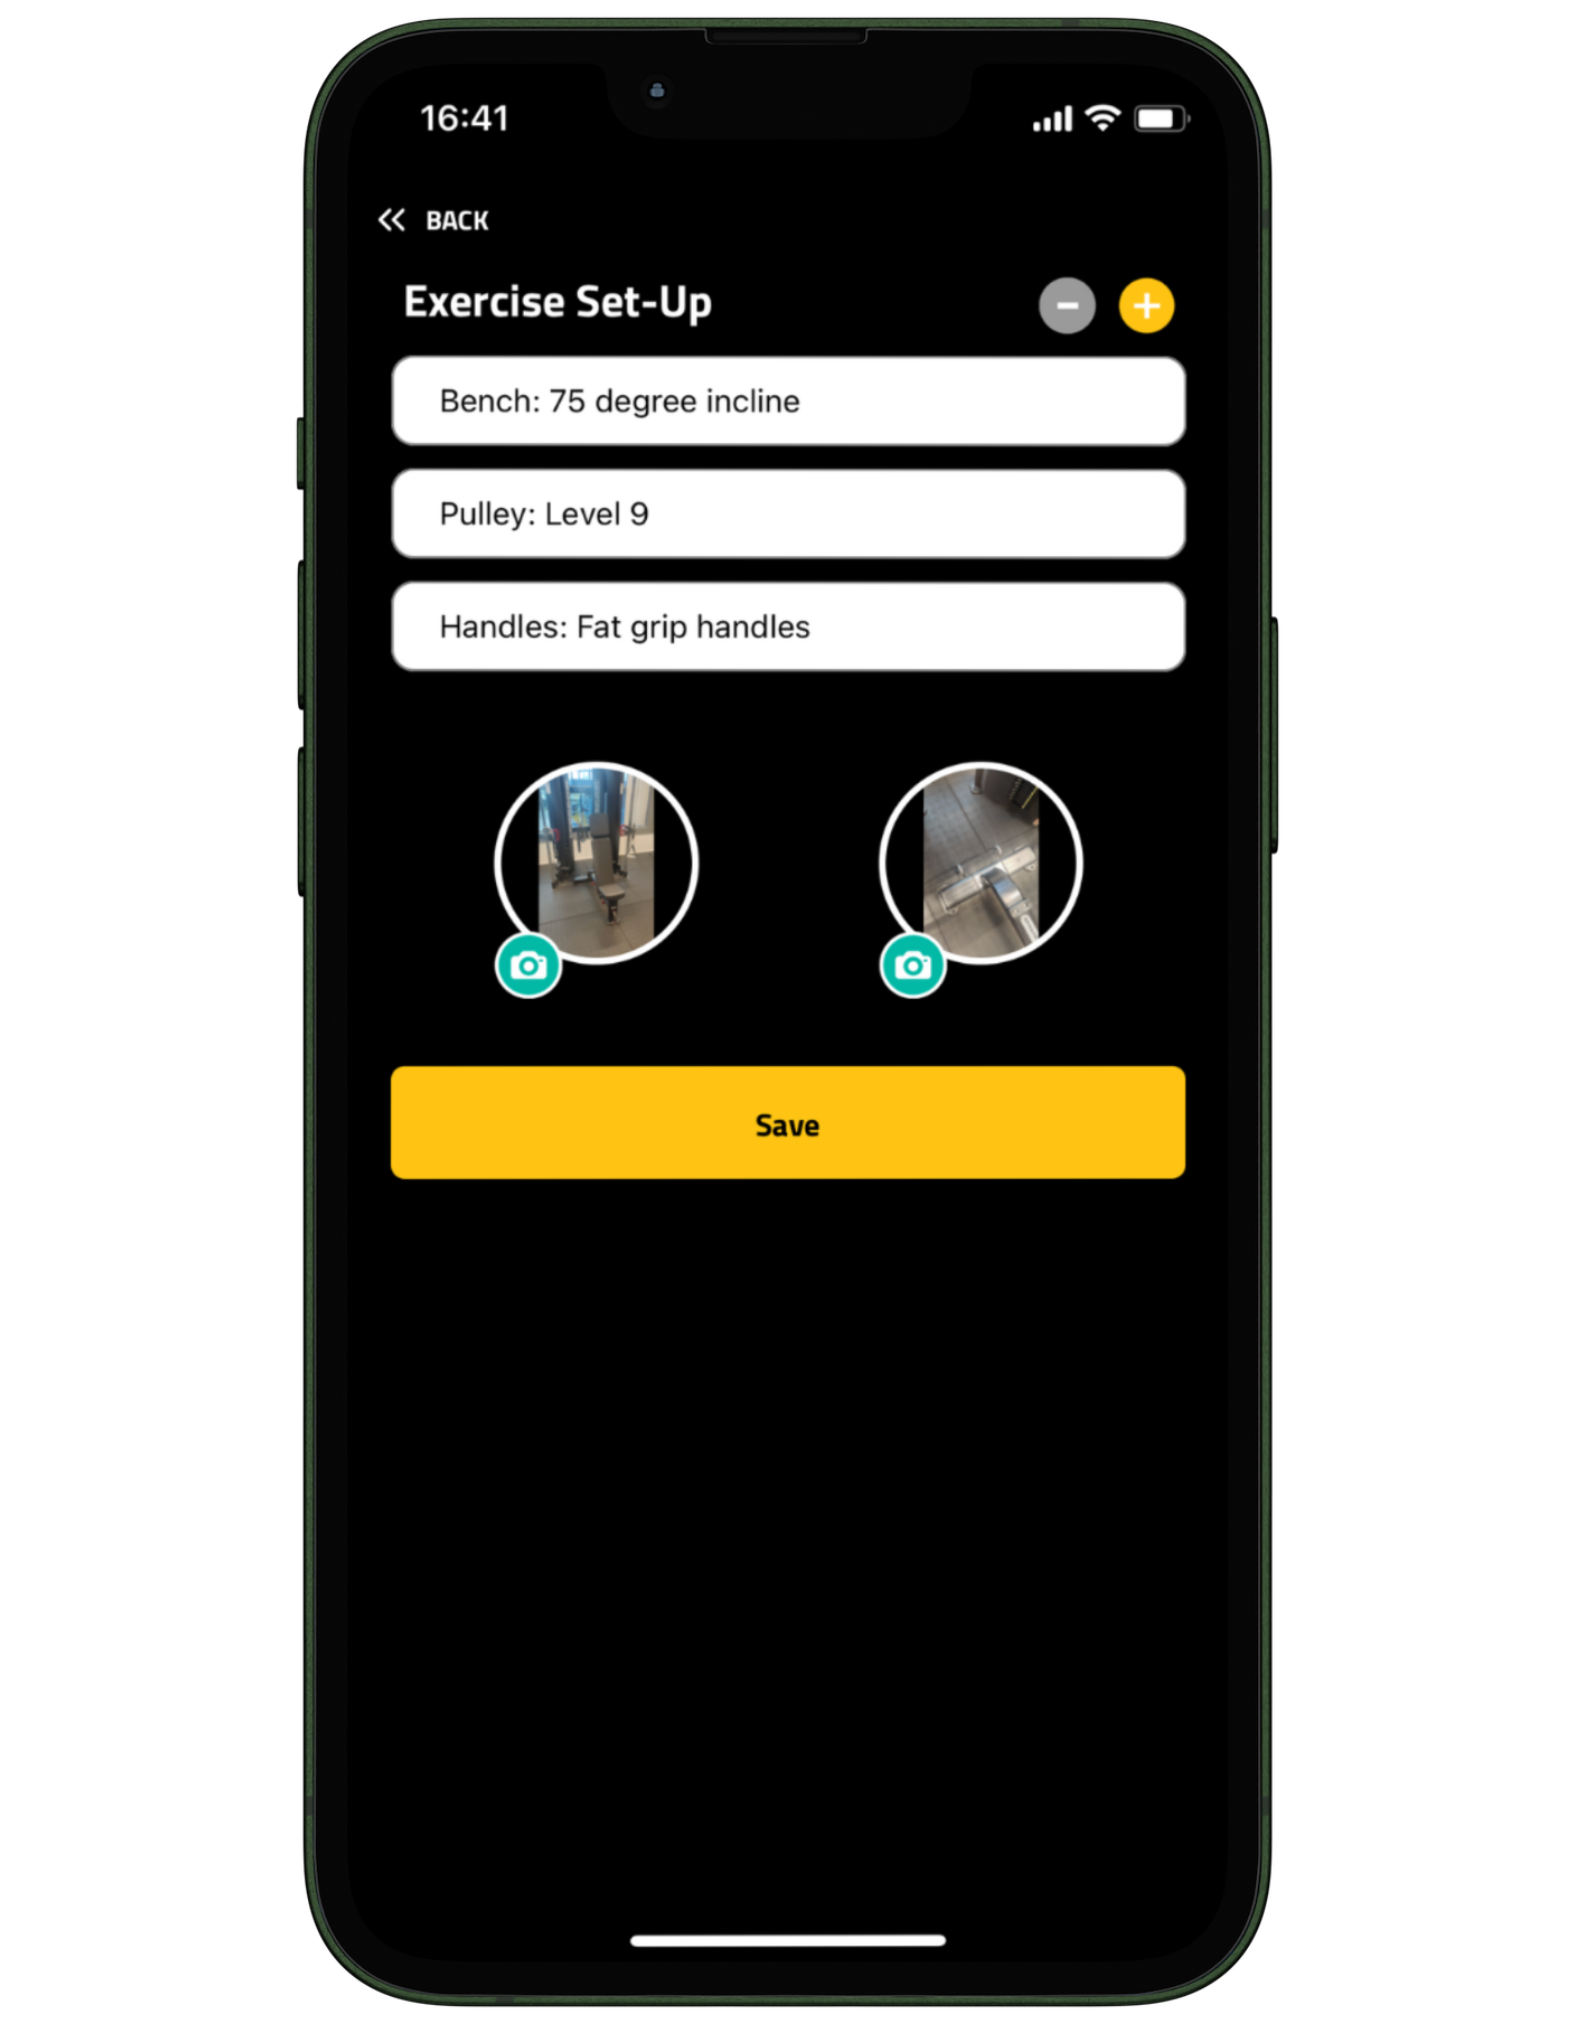 Set-up feature which allows you to share photos of the exercise set-up and specify how to set up the exercise in a correct manner